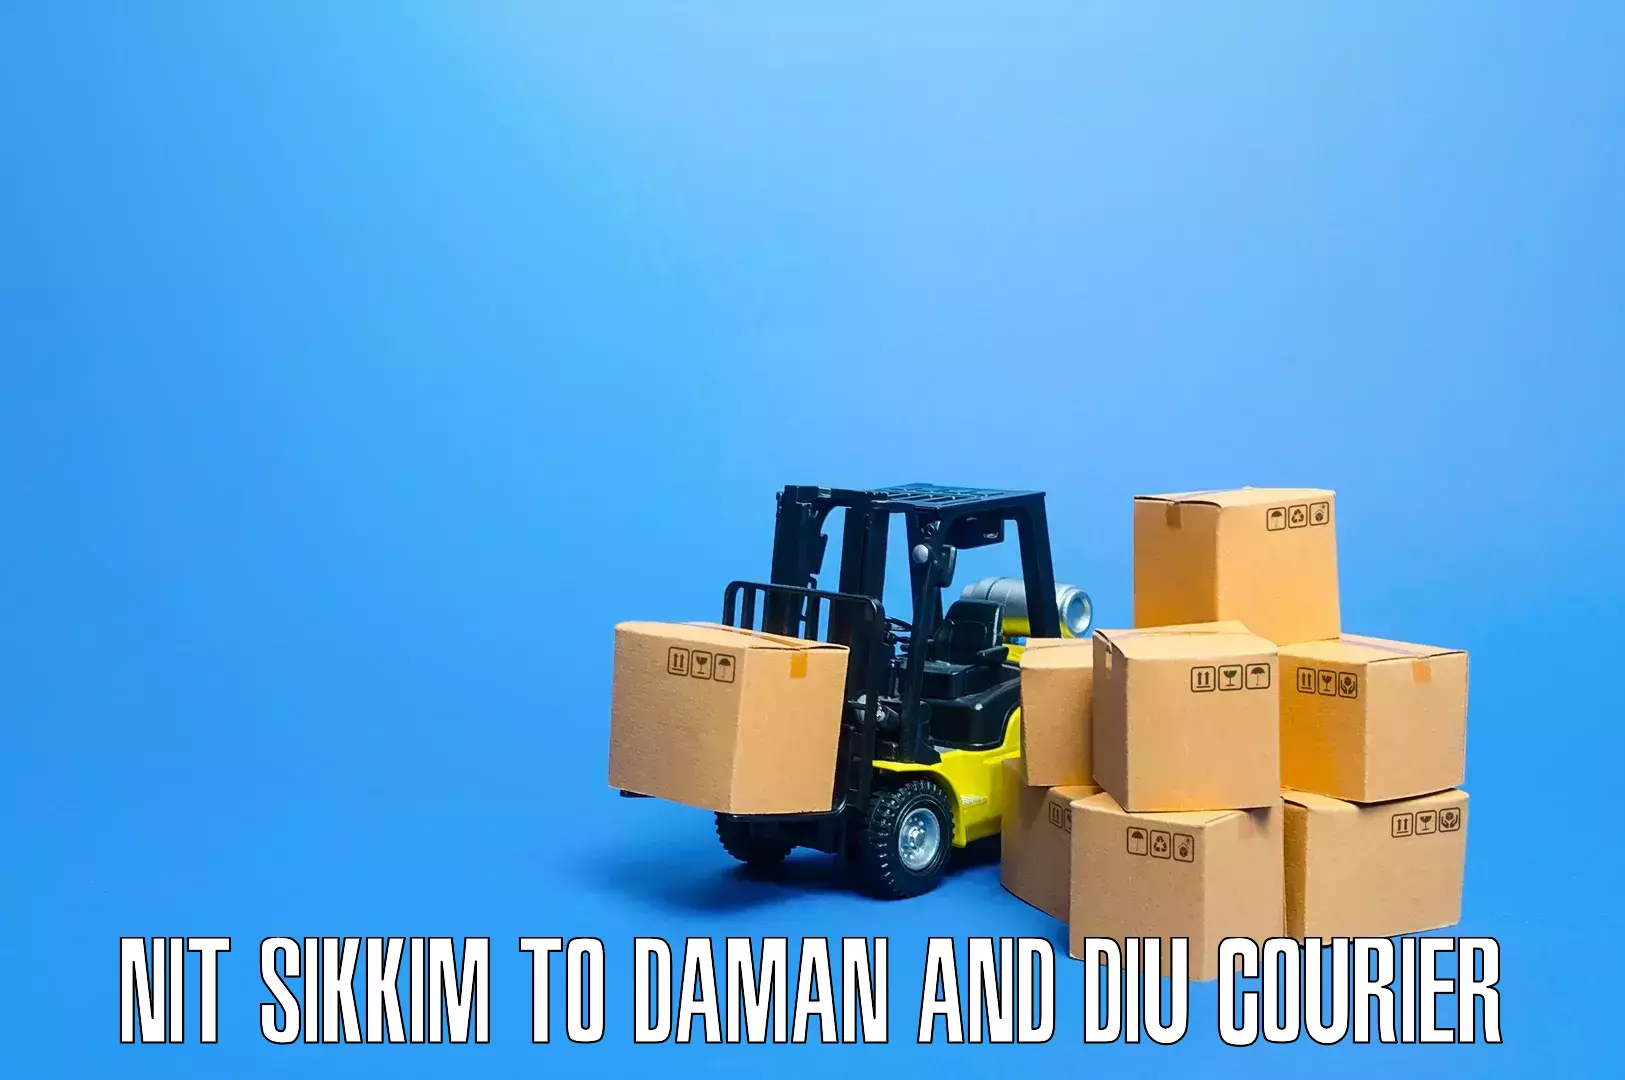 Professional movers and packers NIT Sikkim to Daman